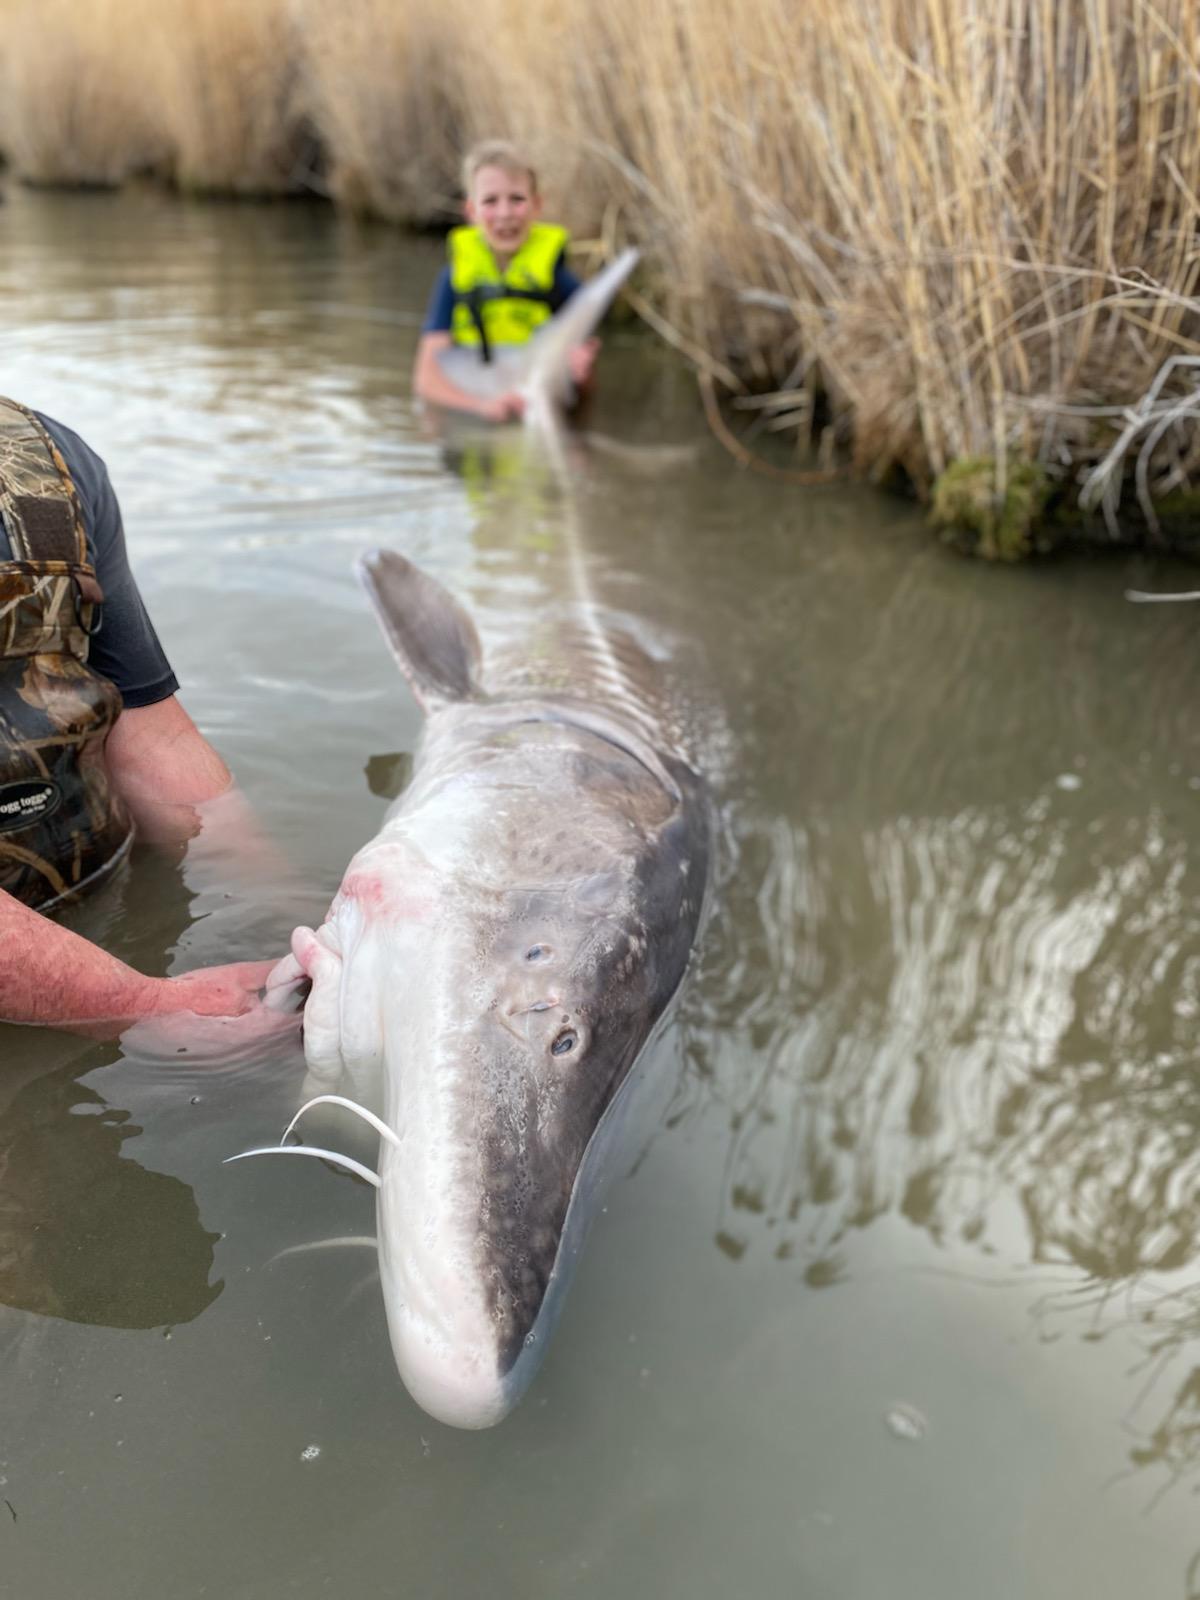 Lance Grimshaw (L) and his son Tyler Grimshaw with the near-record-setting sturgeon. (Courtesy of Joe Weisner,Jones Sport Fishing)